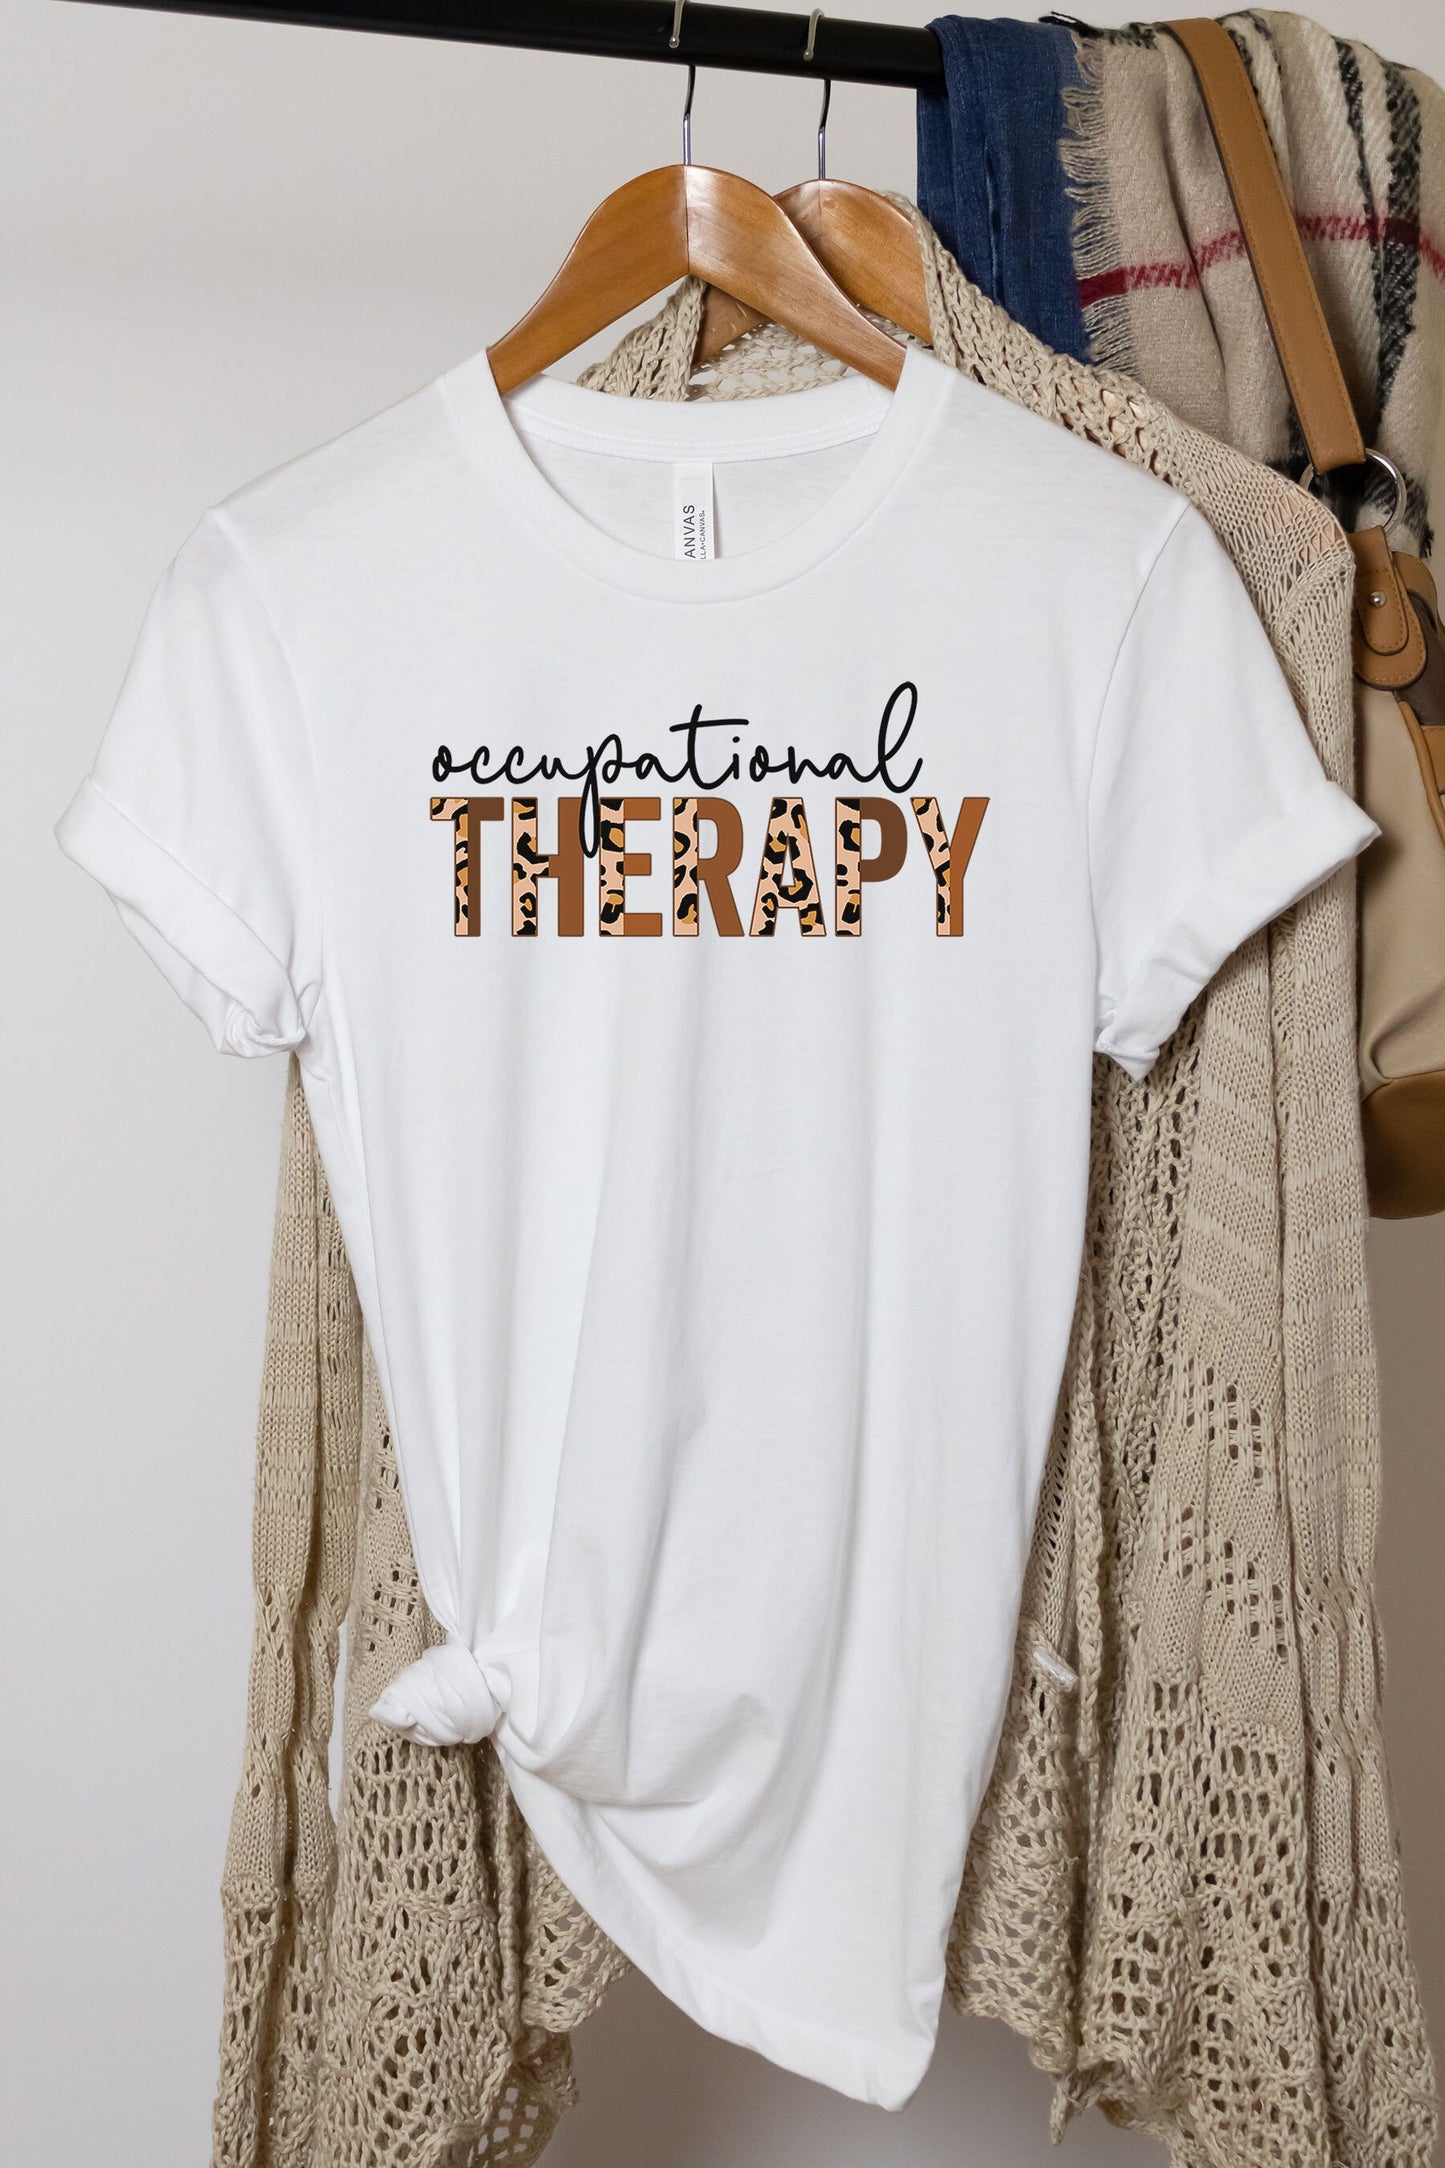 Occupational Therapy Shirt, OT Birthday Gift, Occupational Therapist Tee, Play Therapy Shirt, Special Education Teacher, SPED Team Leopard